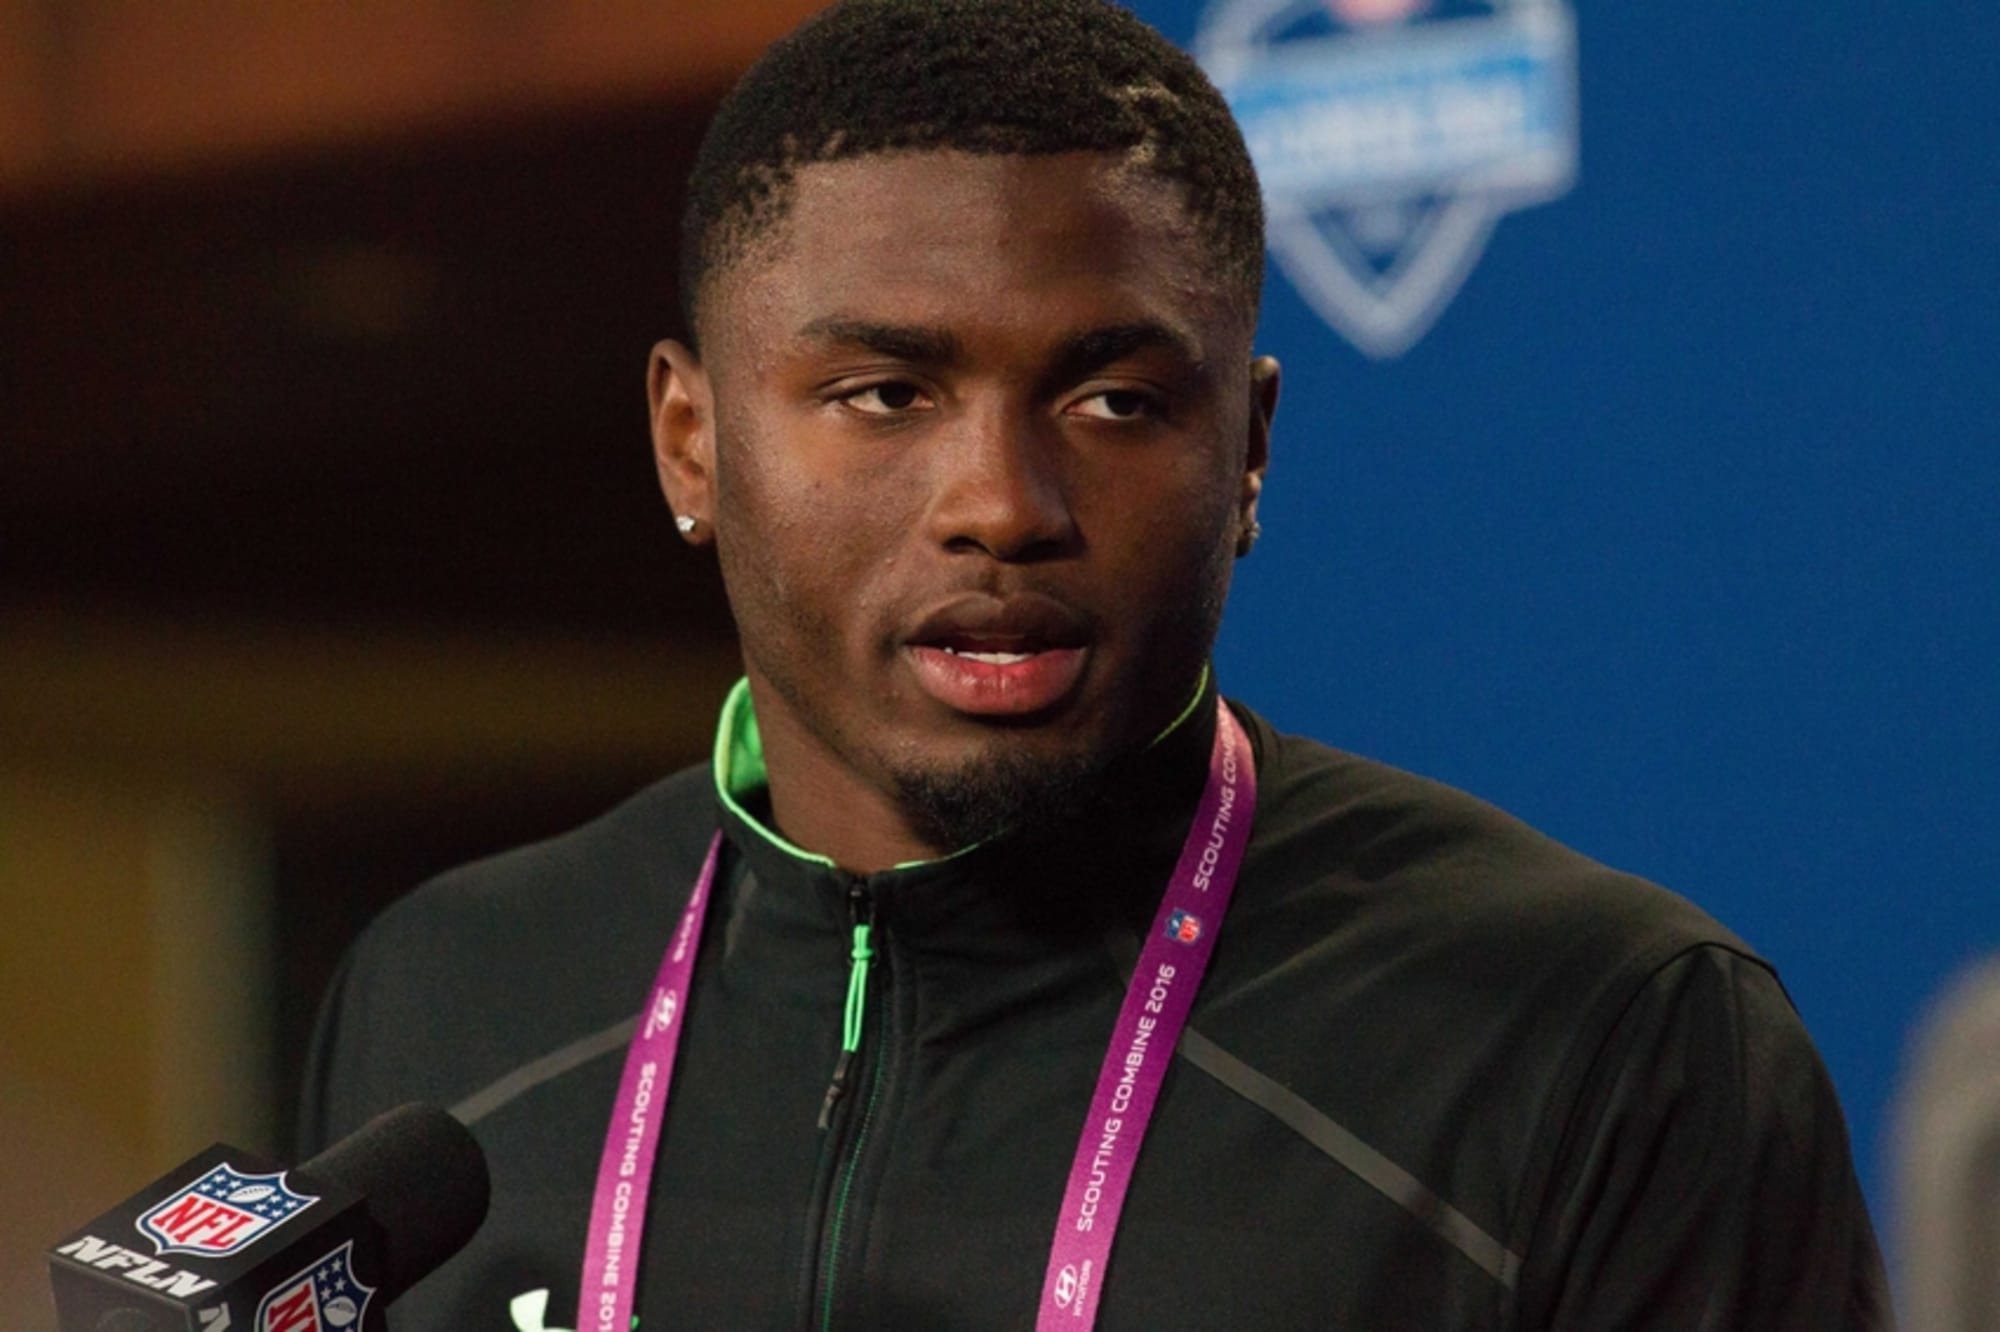 Laquon Treadwell doesn't watch TV, just wants to win